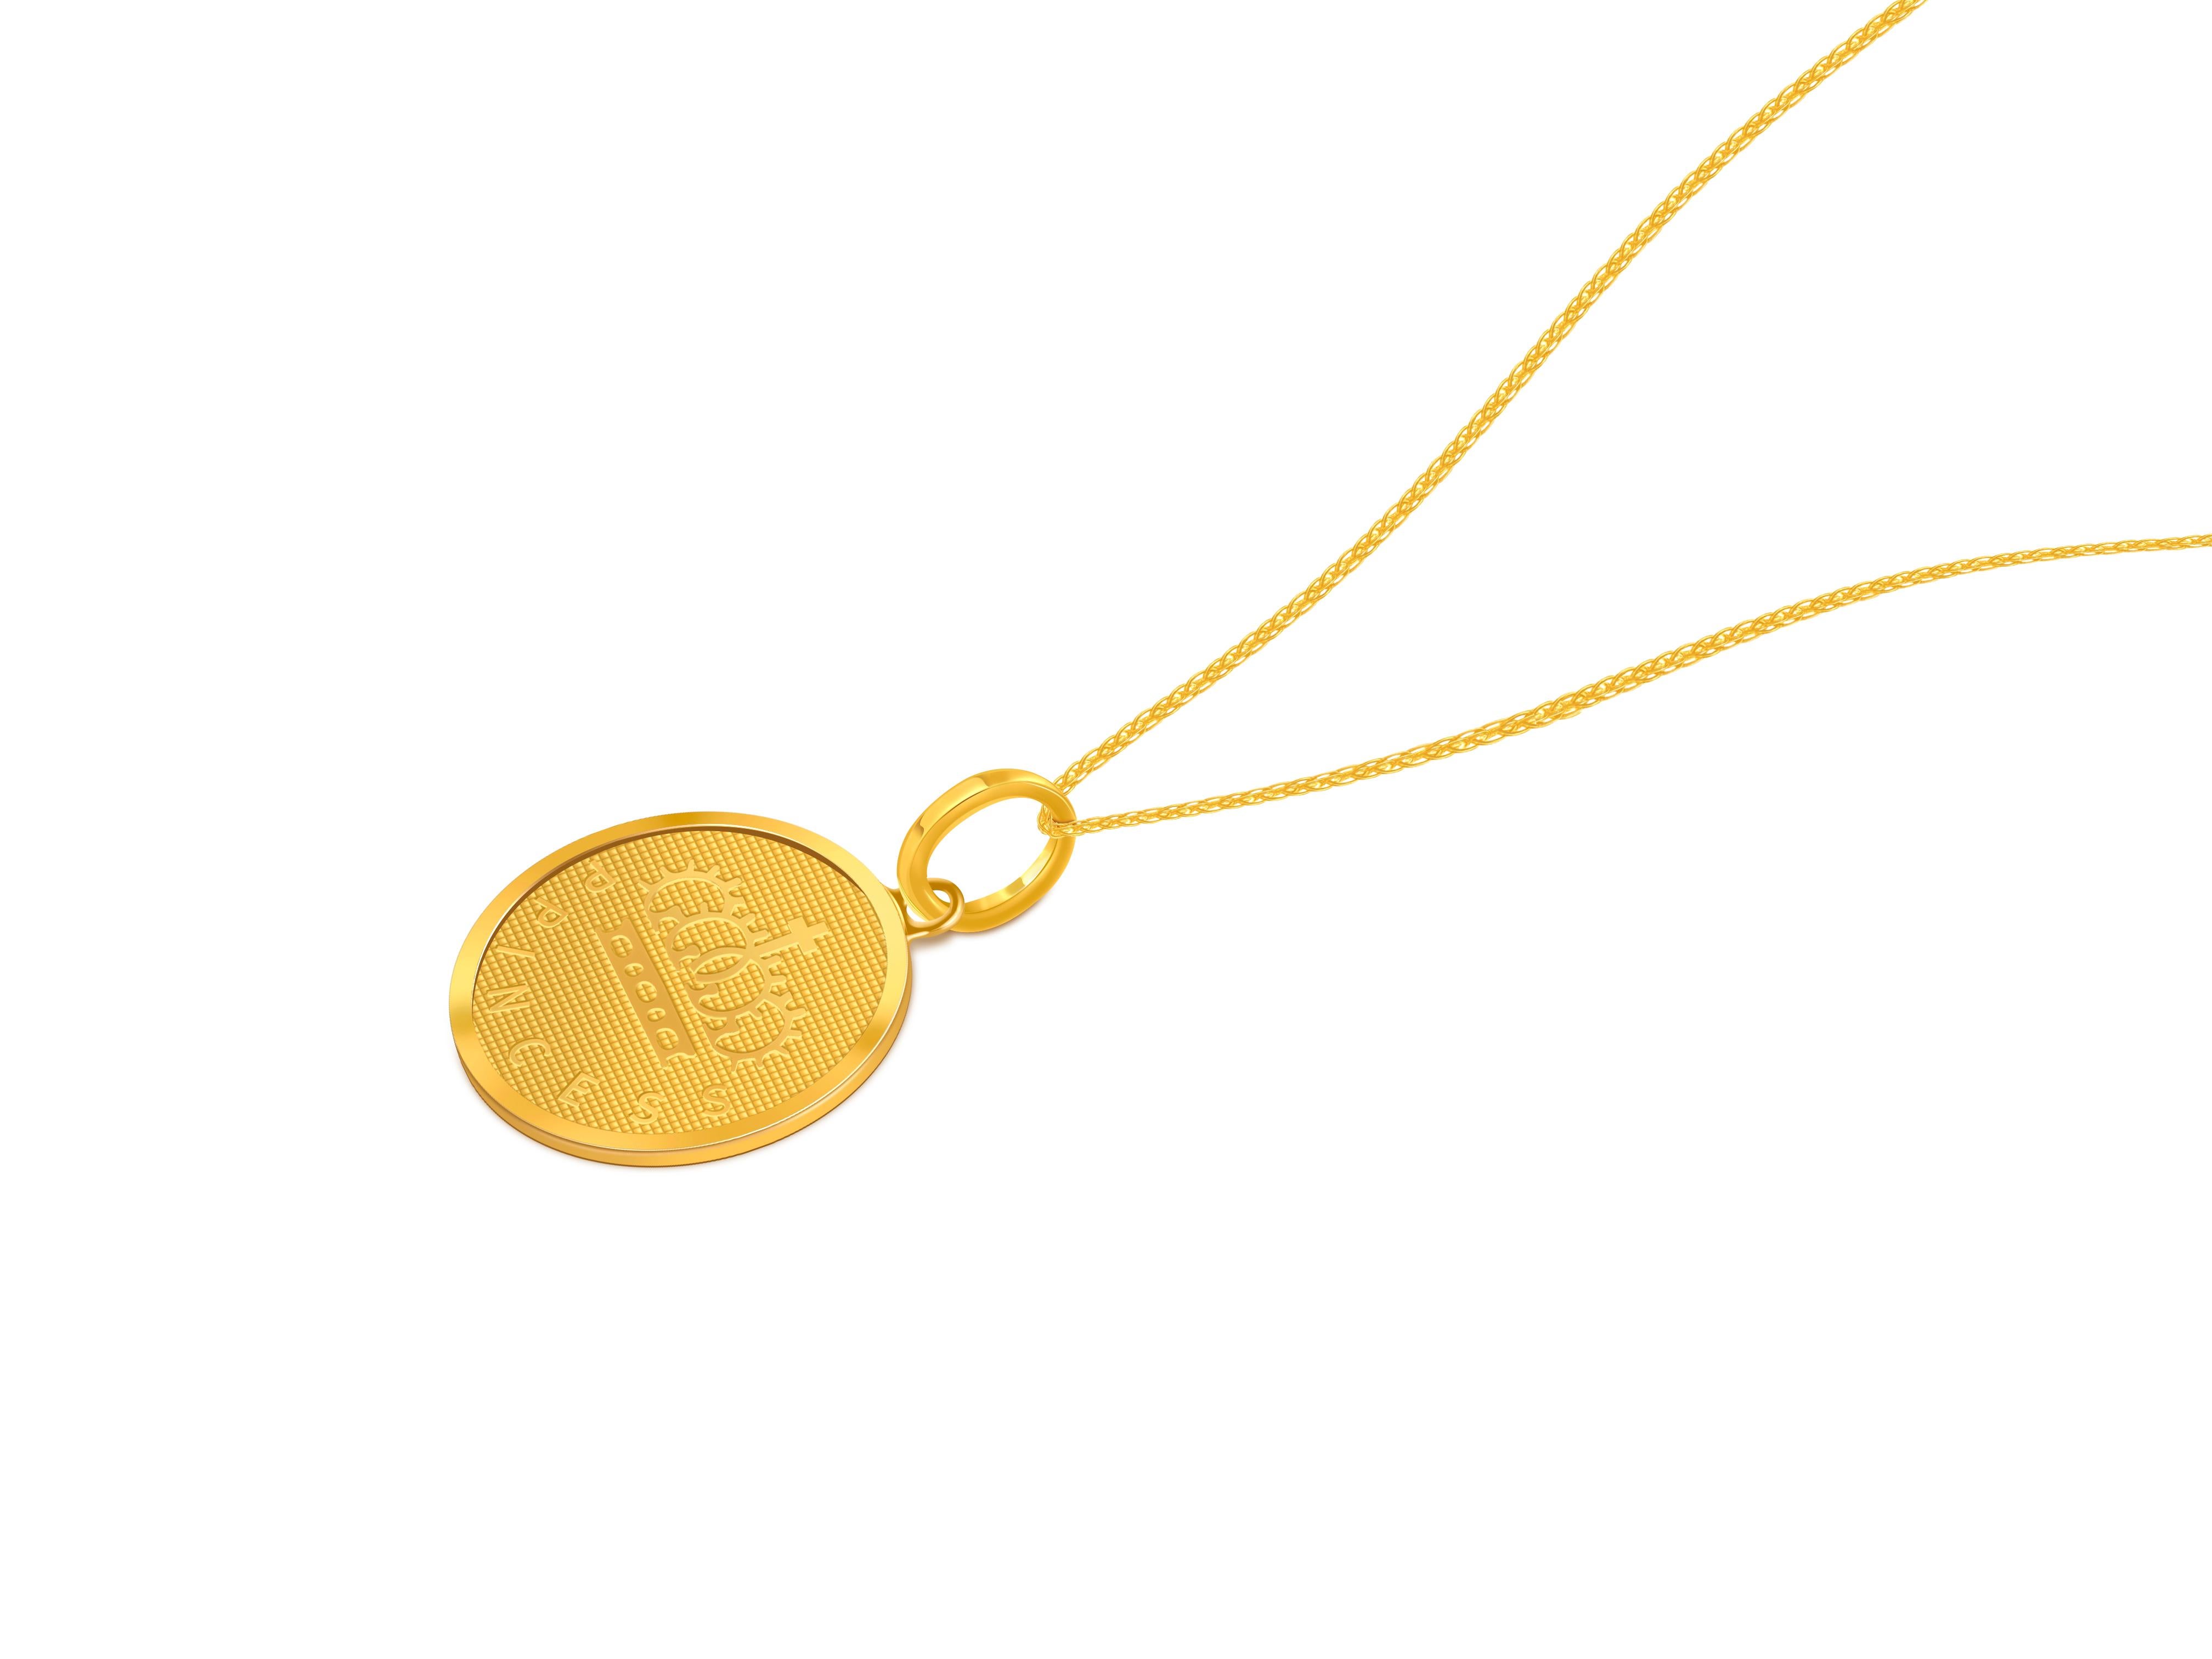 A simple round pendant with necklace in 18K gold.
The company was founded one and a half centuries ago in Macau. The brand is renowned for its high jewelry collections with fabulous designs. Our designs reflect the cultural and aesthetic value of